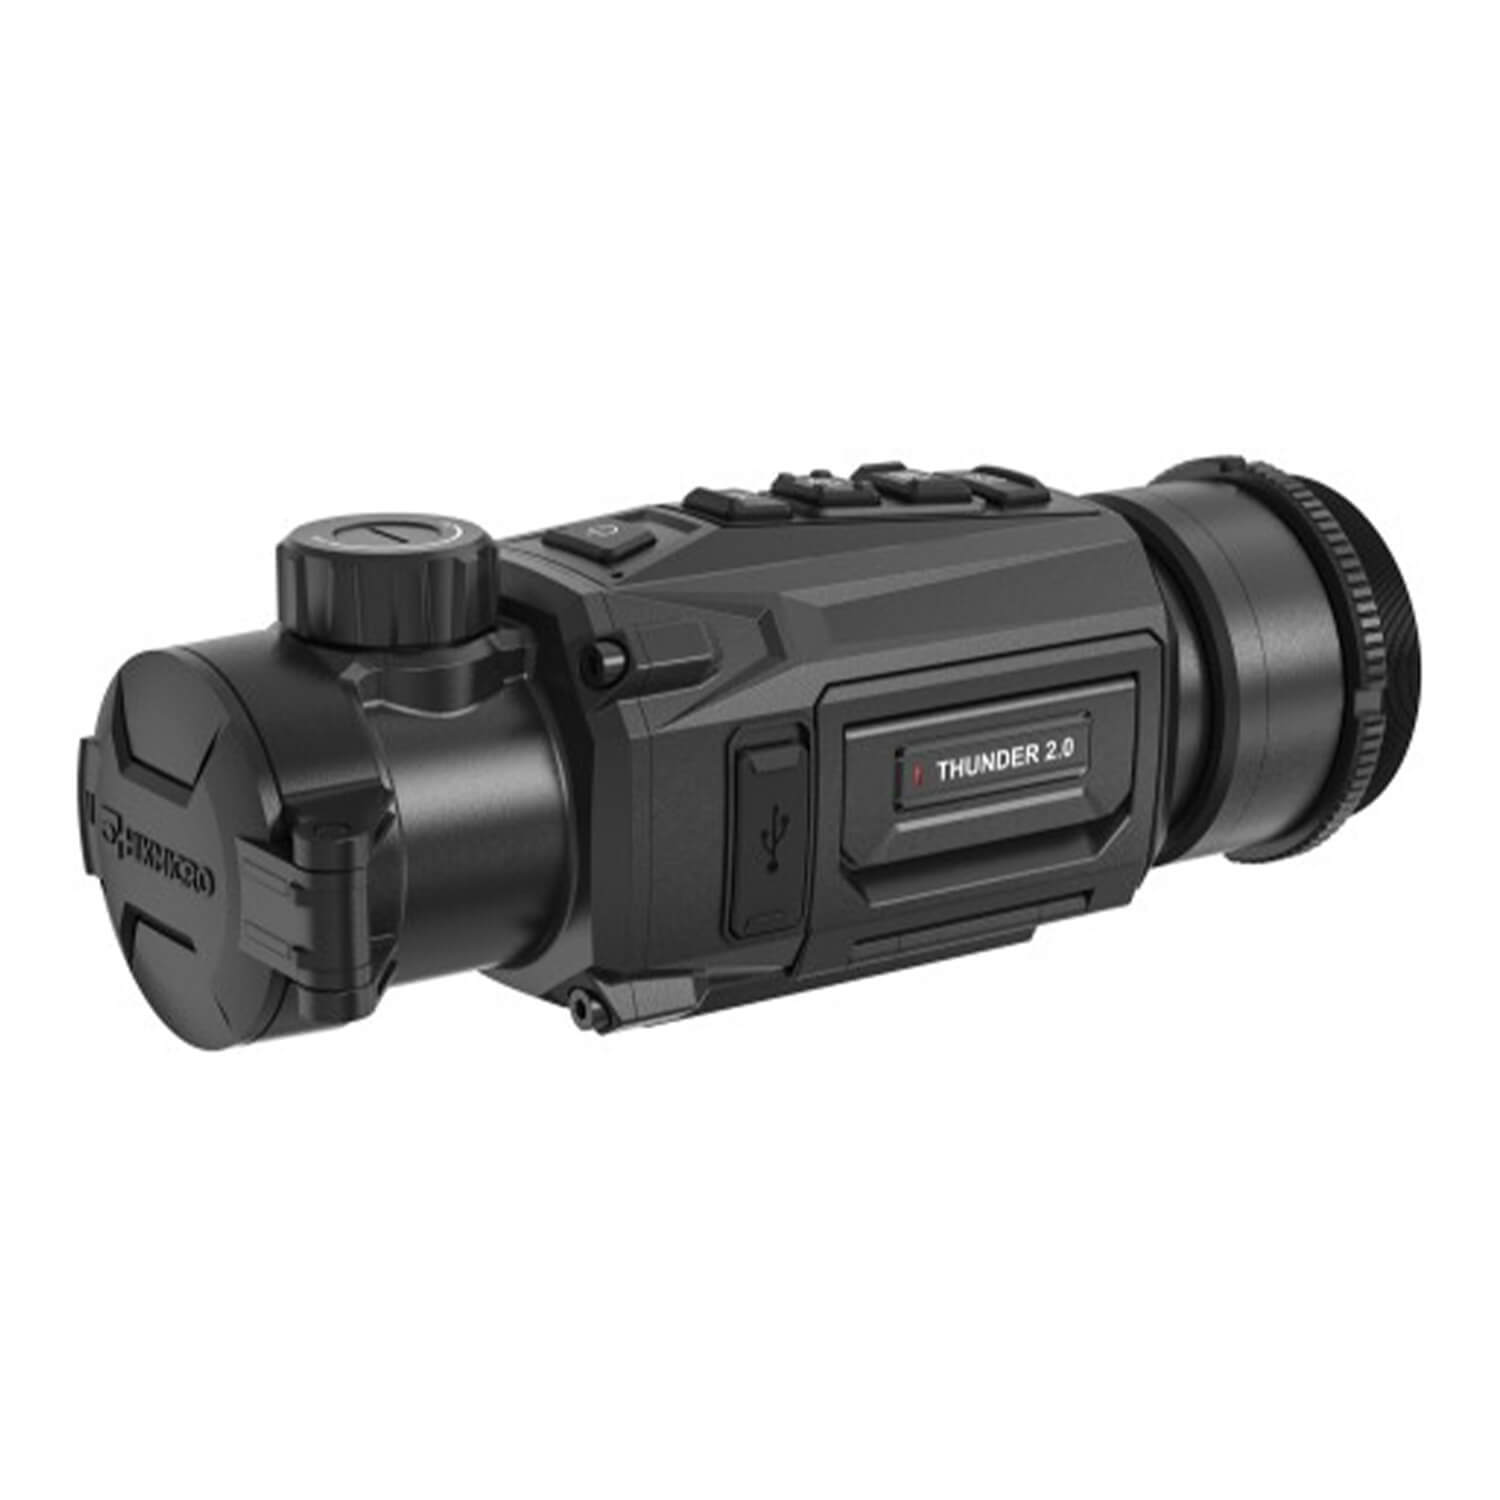 Hikmicro thermal imaging scope Thunder 2.0 TH35PC